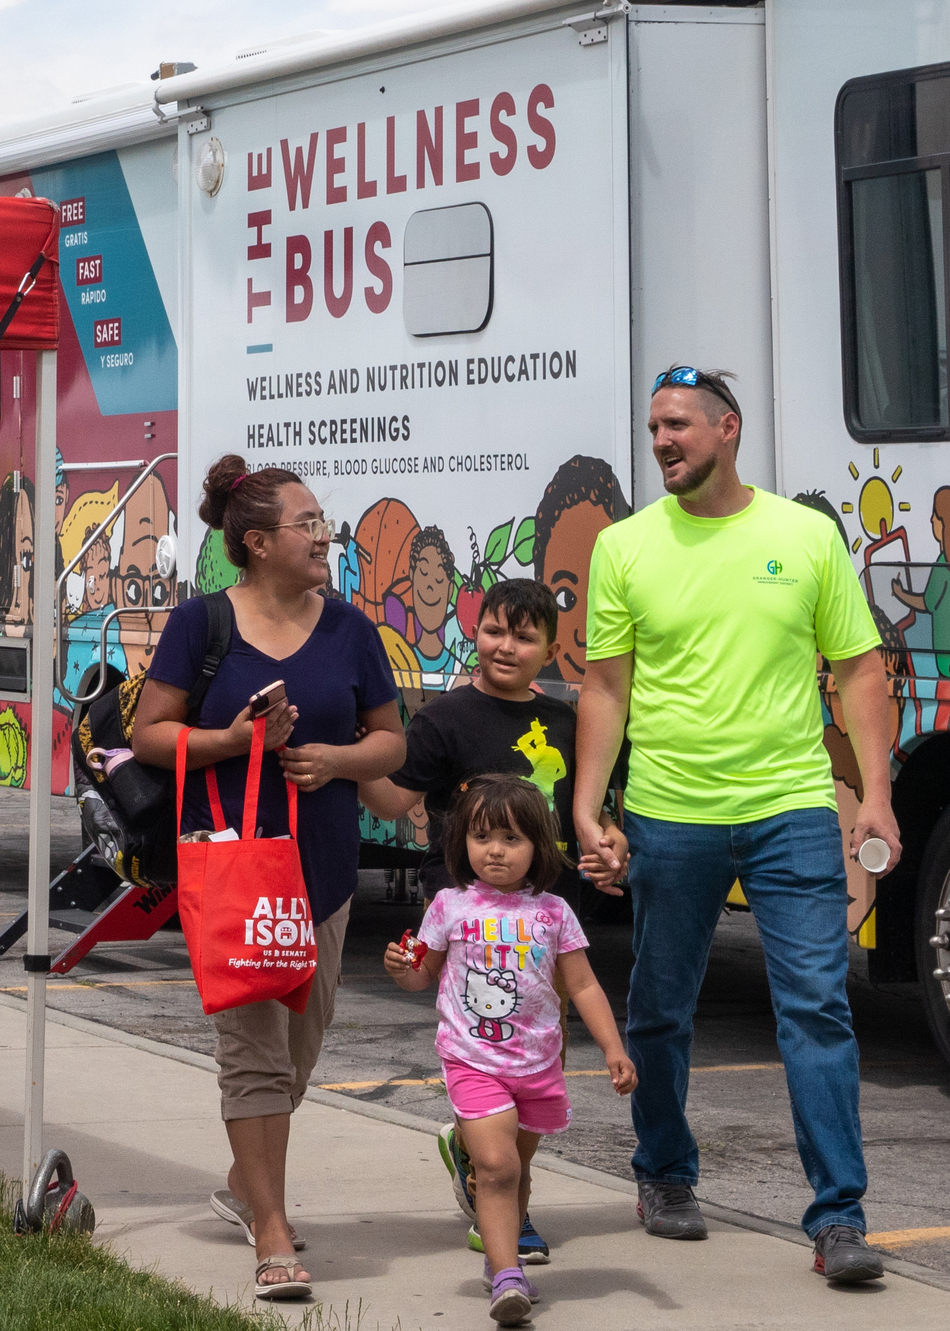 The Wellness Bus Offers Free Nutrition Counseling Sessions in Utah